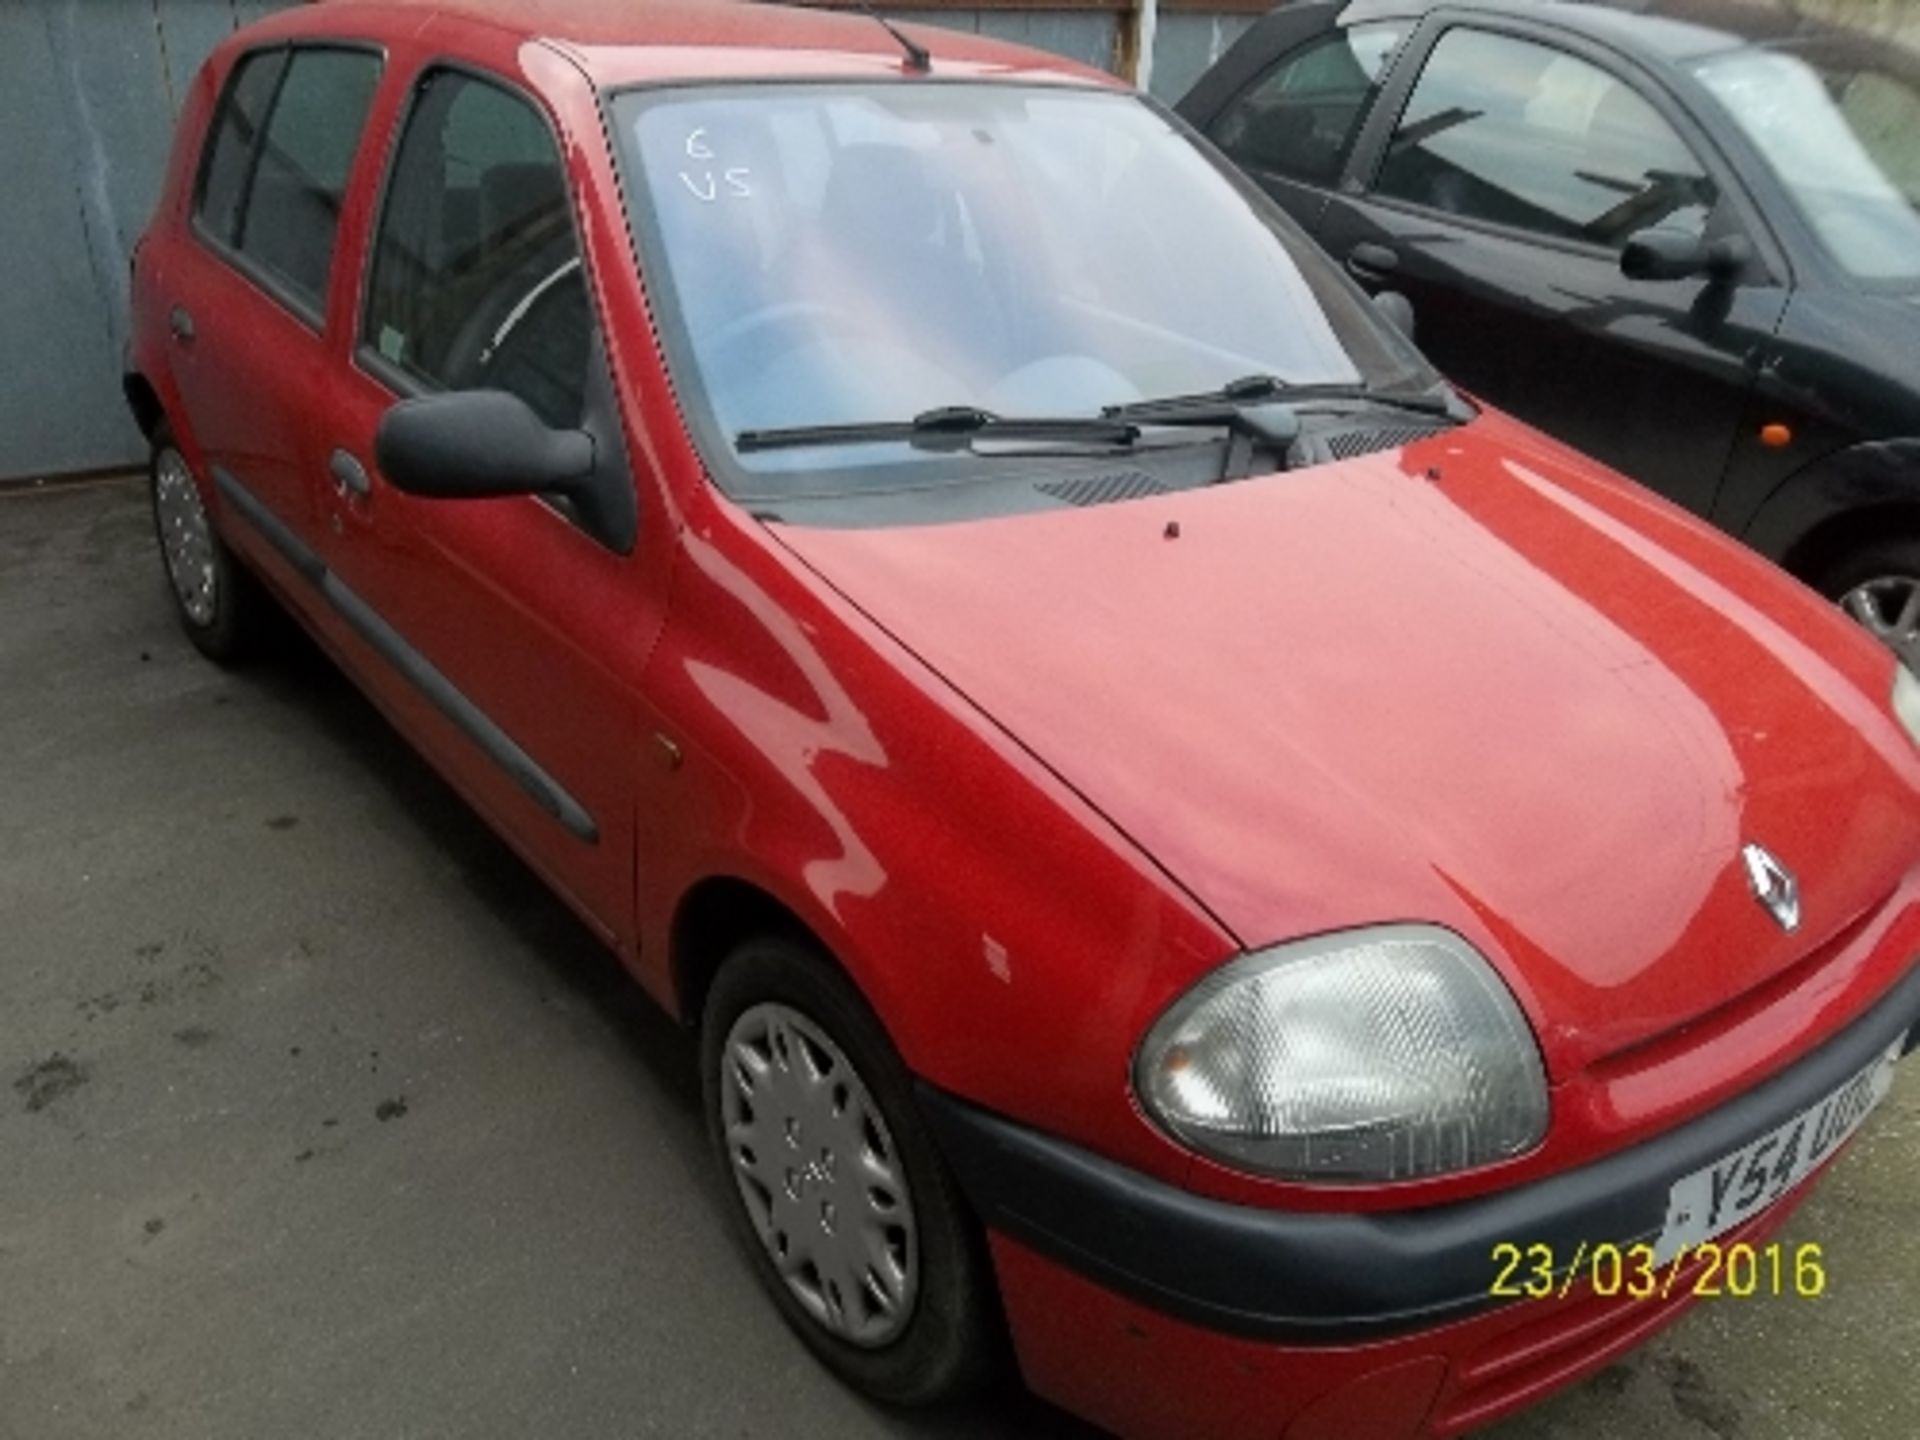 Renault Clio Alize - Y54 UOC Date of registration: 31.03.2001 1390cc, petrol, manual, red Odometer - Image 2 of 4